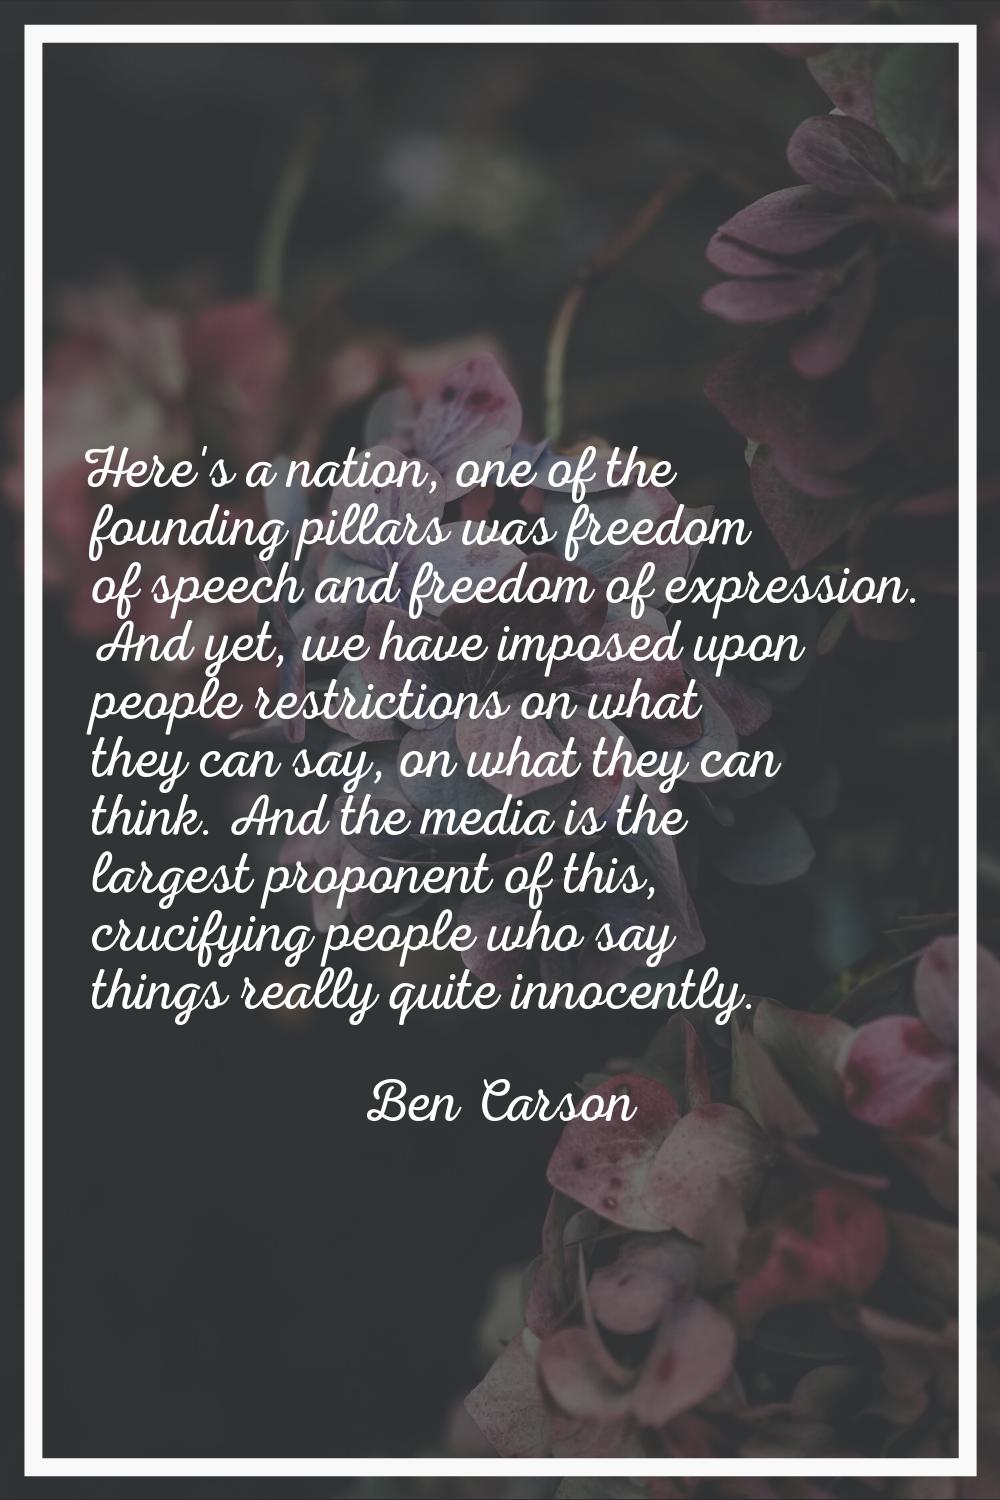 Here's a nation, one of the founding pillars was freedom of speech and freedom of expression. And y